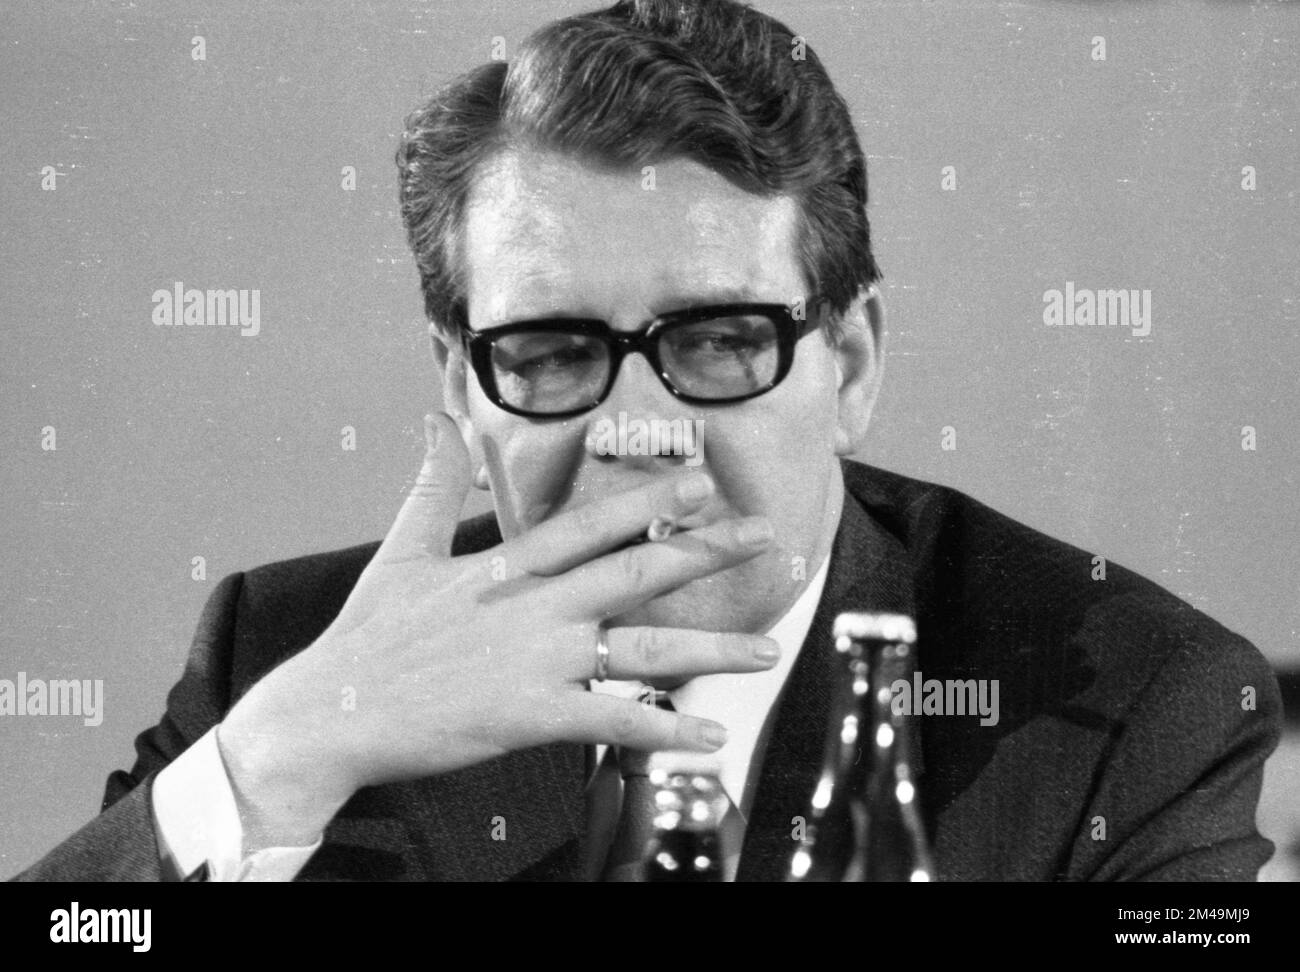 The 18th Party Congress of the Christian Democratic Union of Germany (CDU) was held in Duesseldorf on 25 January 1971. Heinrich Koeppler, Germany Stock Photo